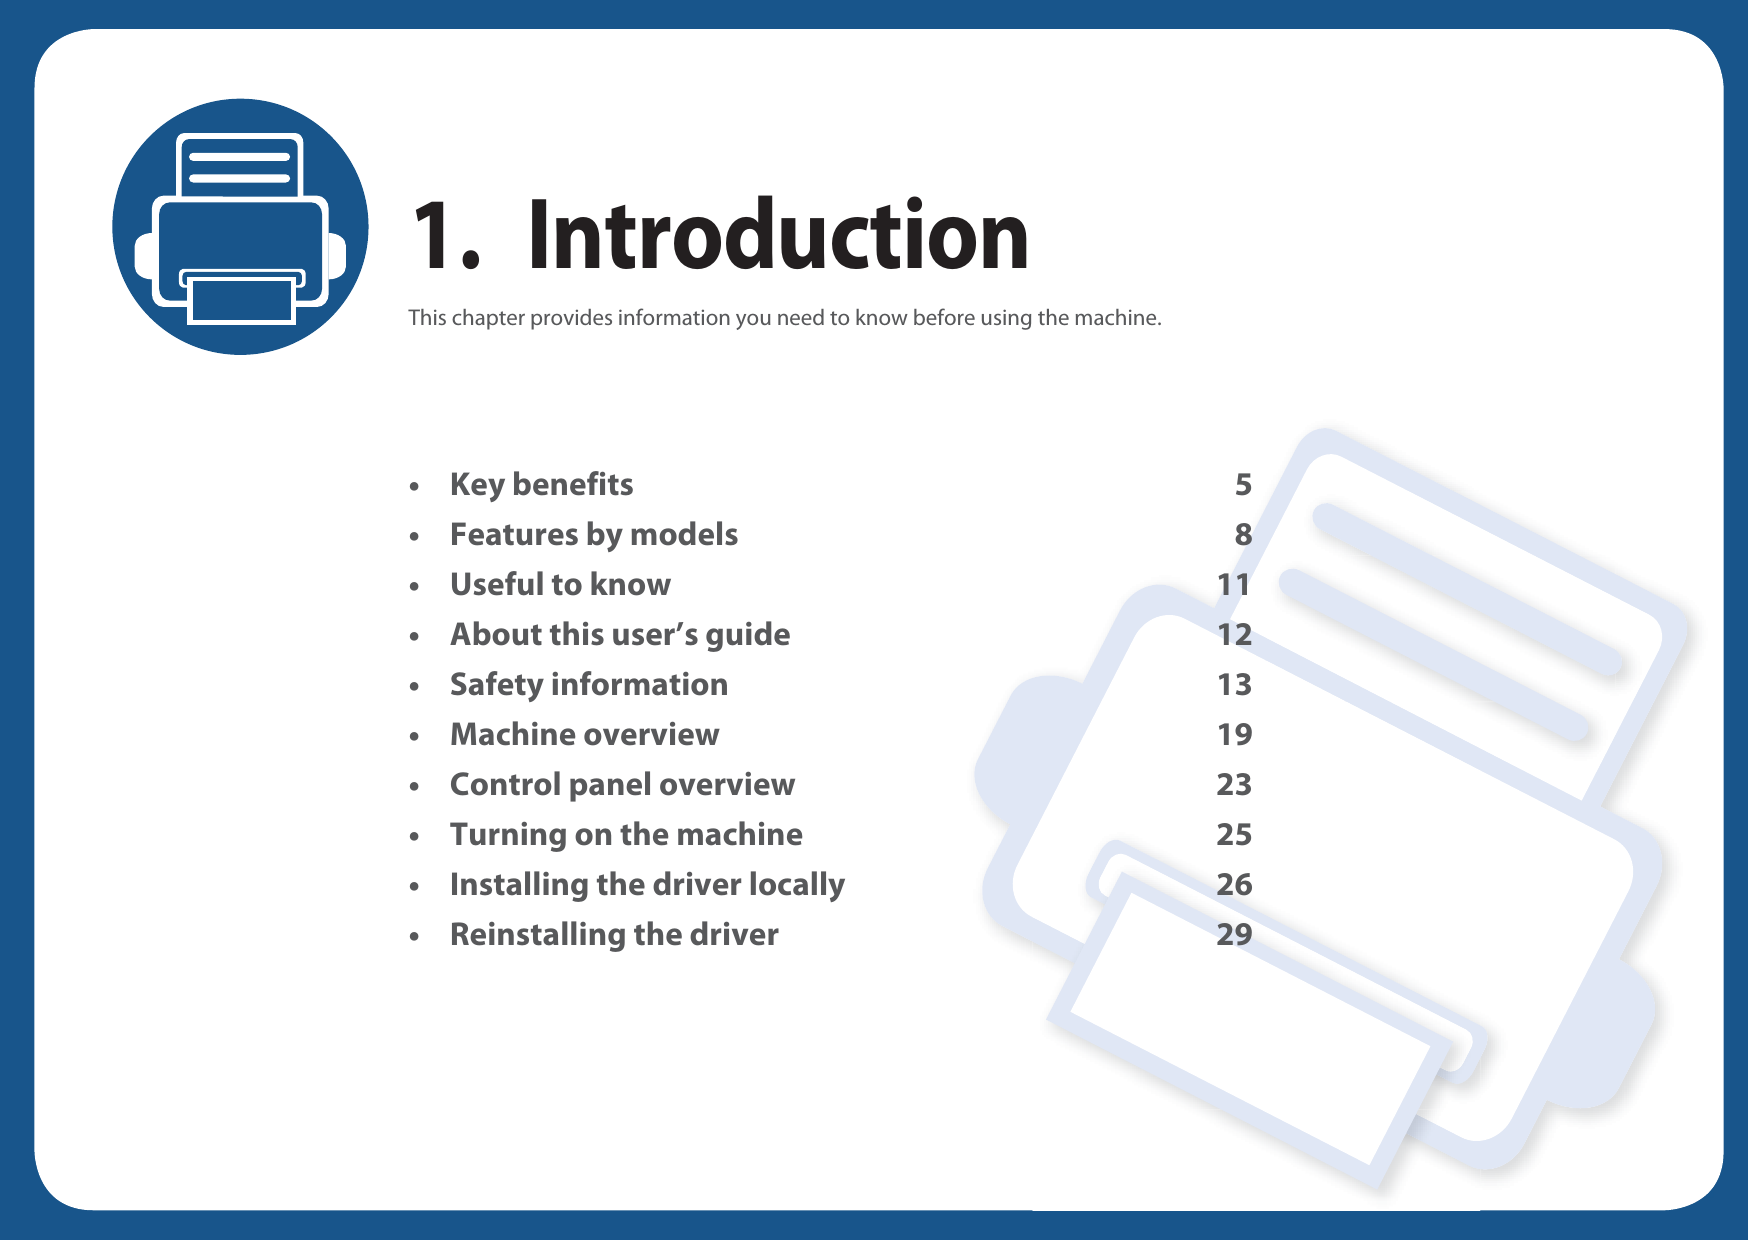 1. IntroductionThis chapter provides information you need to know before using the machine.•Key benefits 5• Features by models 8• Useful to know 11• About this user’s guide 12• Safety information 13• Machine overview 19• Control panel overview 23• Turning on the machine 25• Installing the driver locally 26• Reinstalling the driver 29